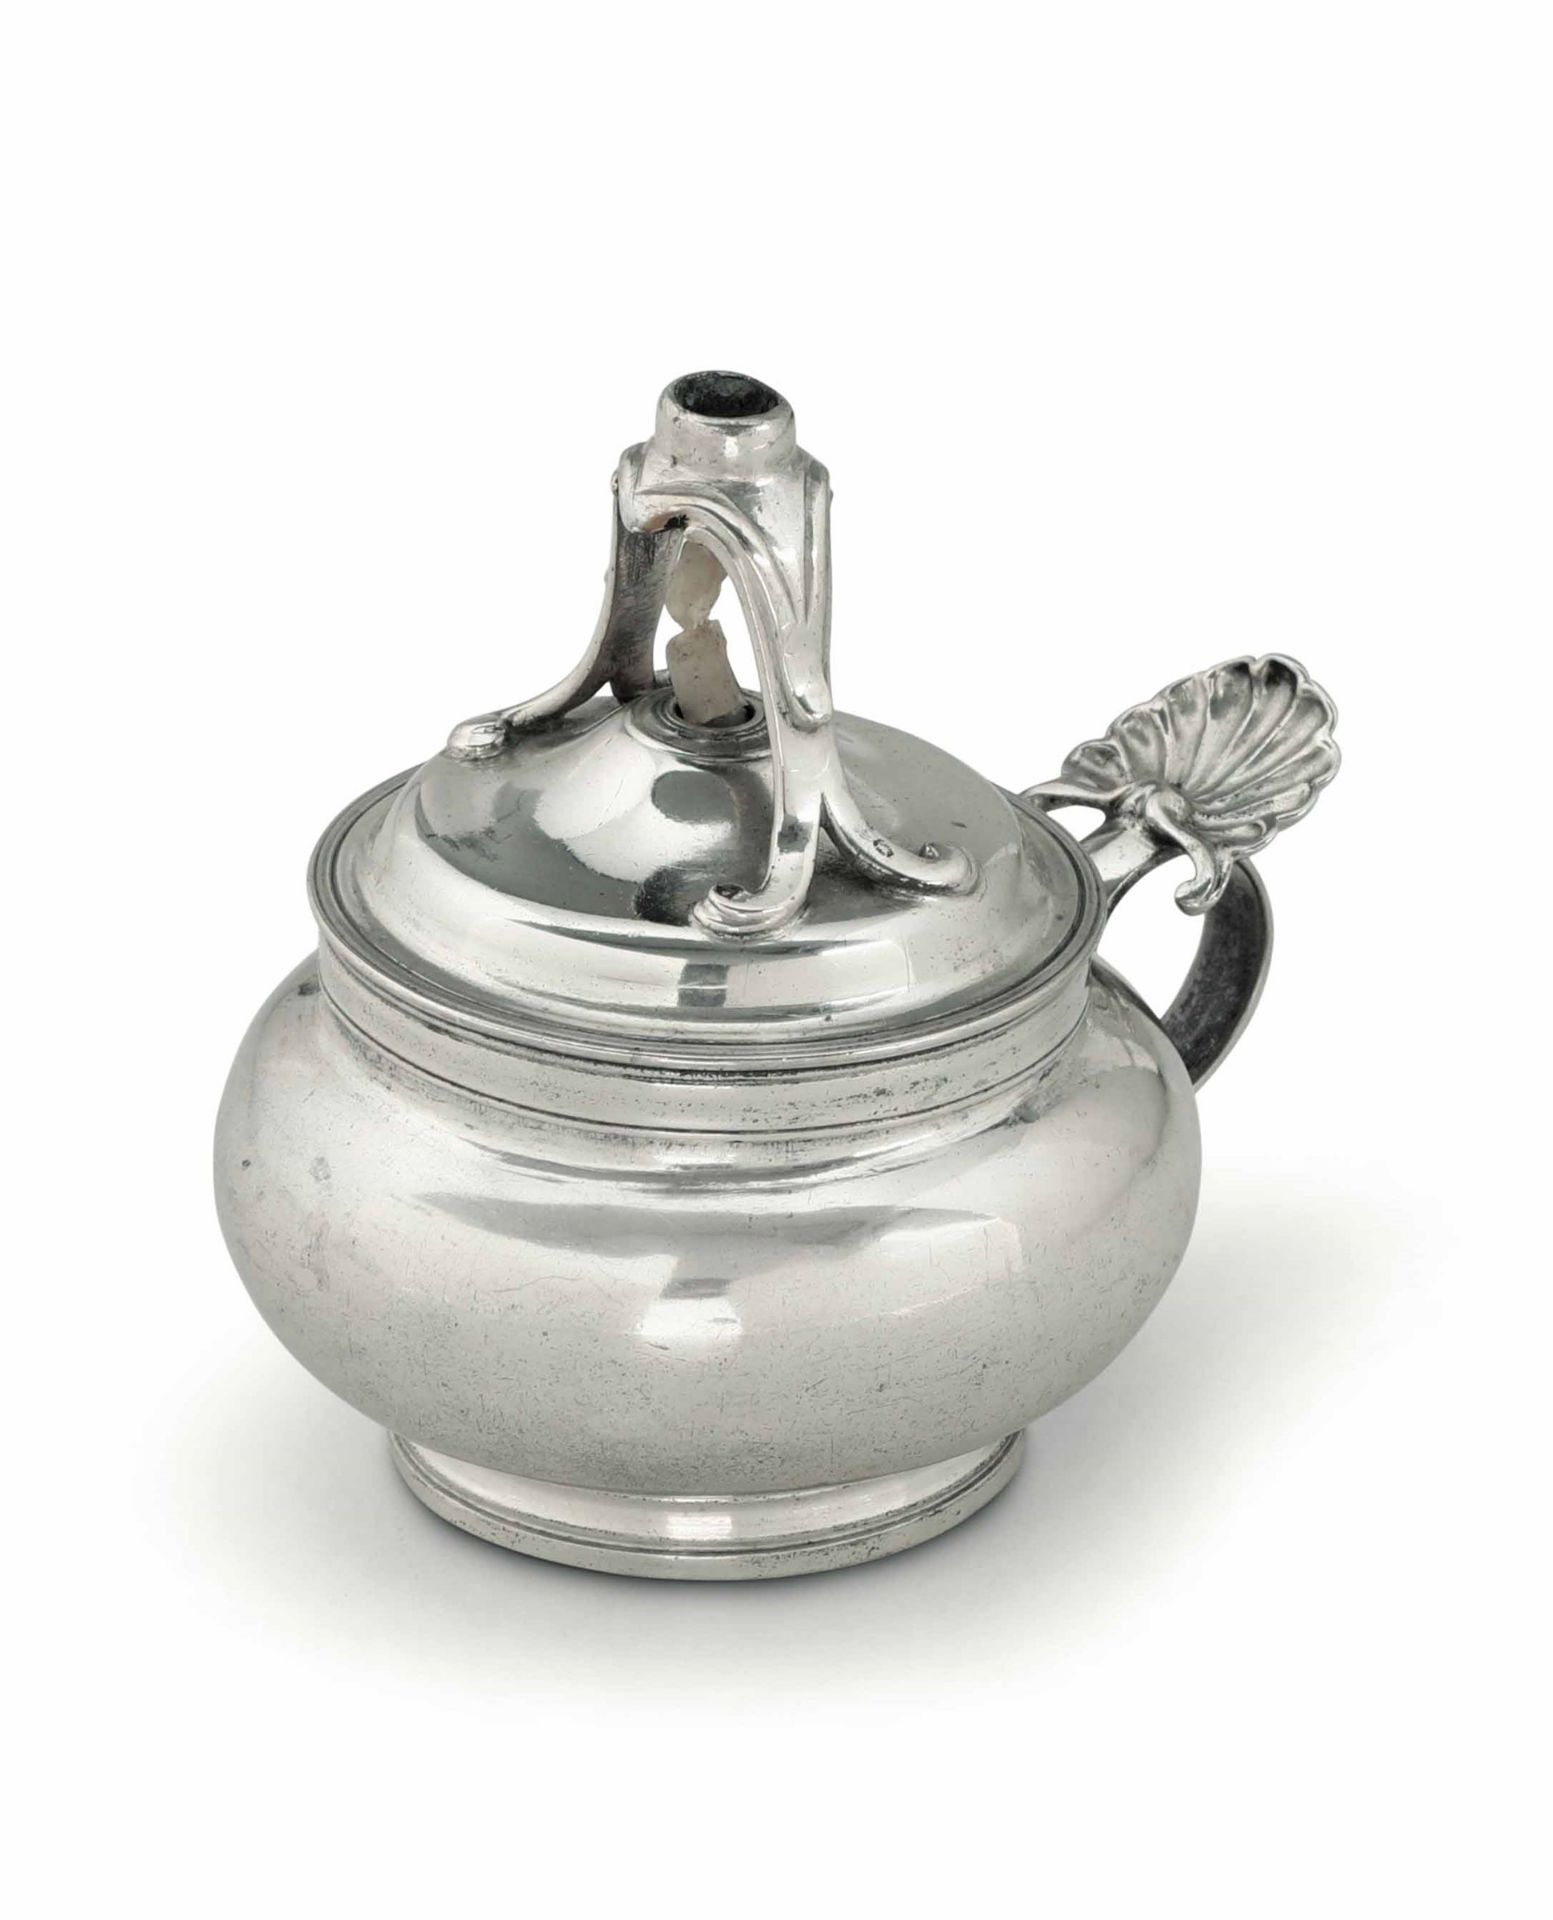 A silver wick holder, Tuscany, 1700s - Molten, embossed and spun silver, mid 1700s, [...]